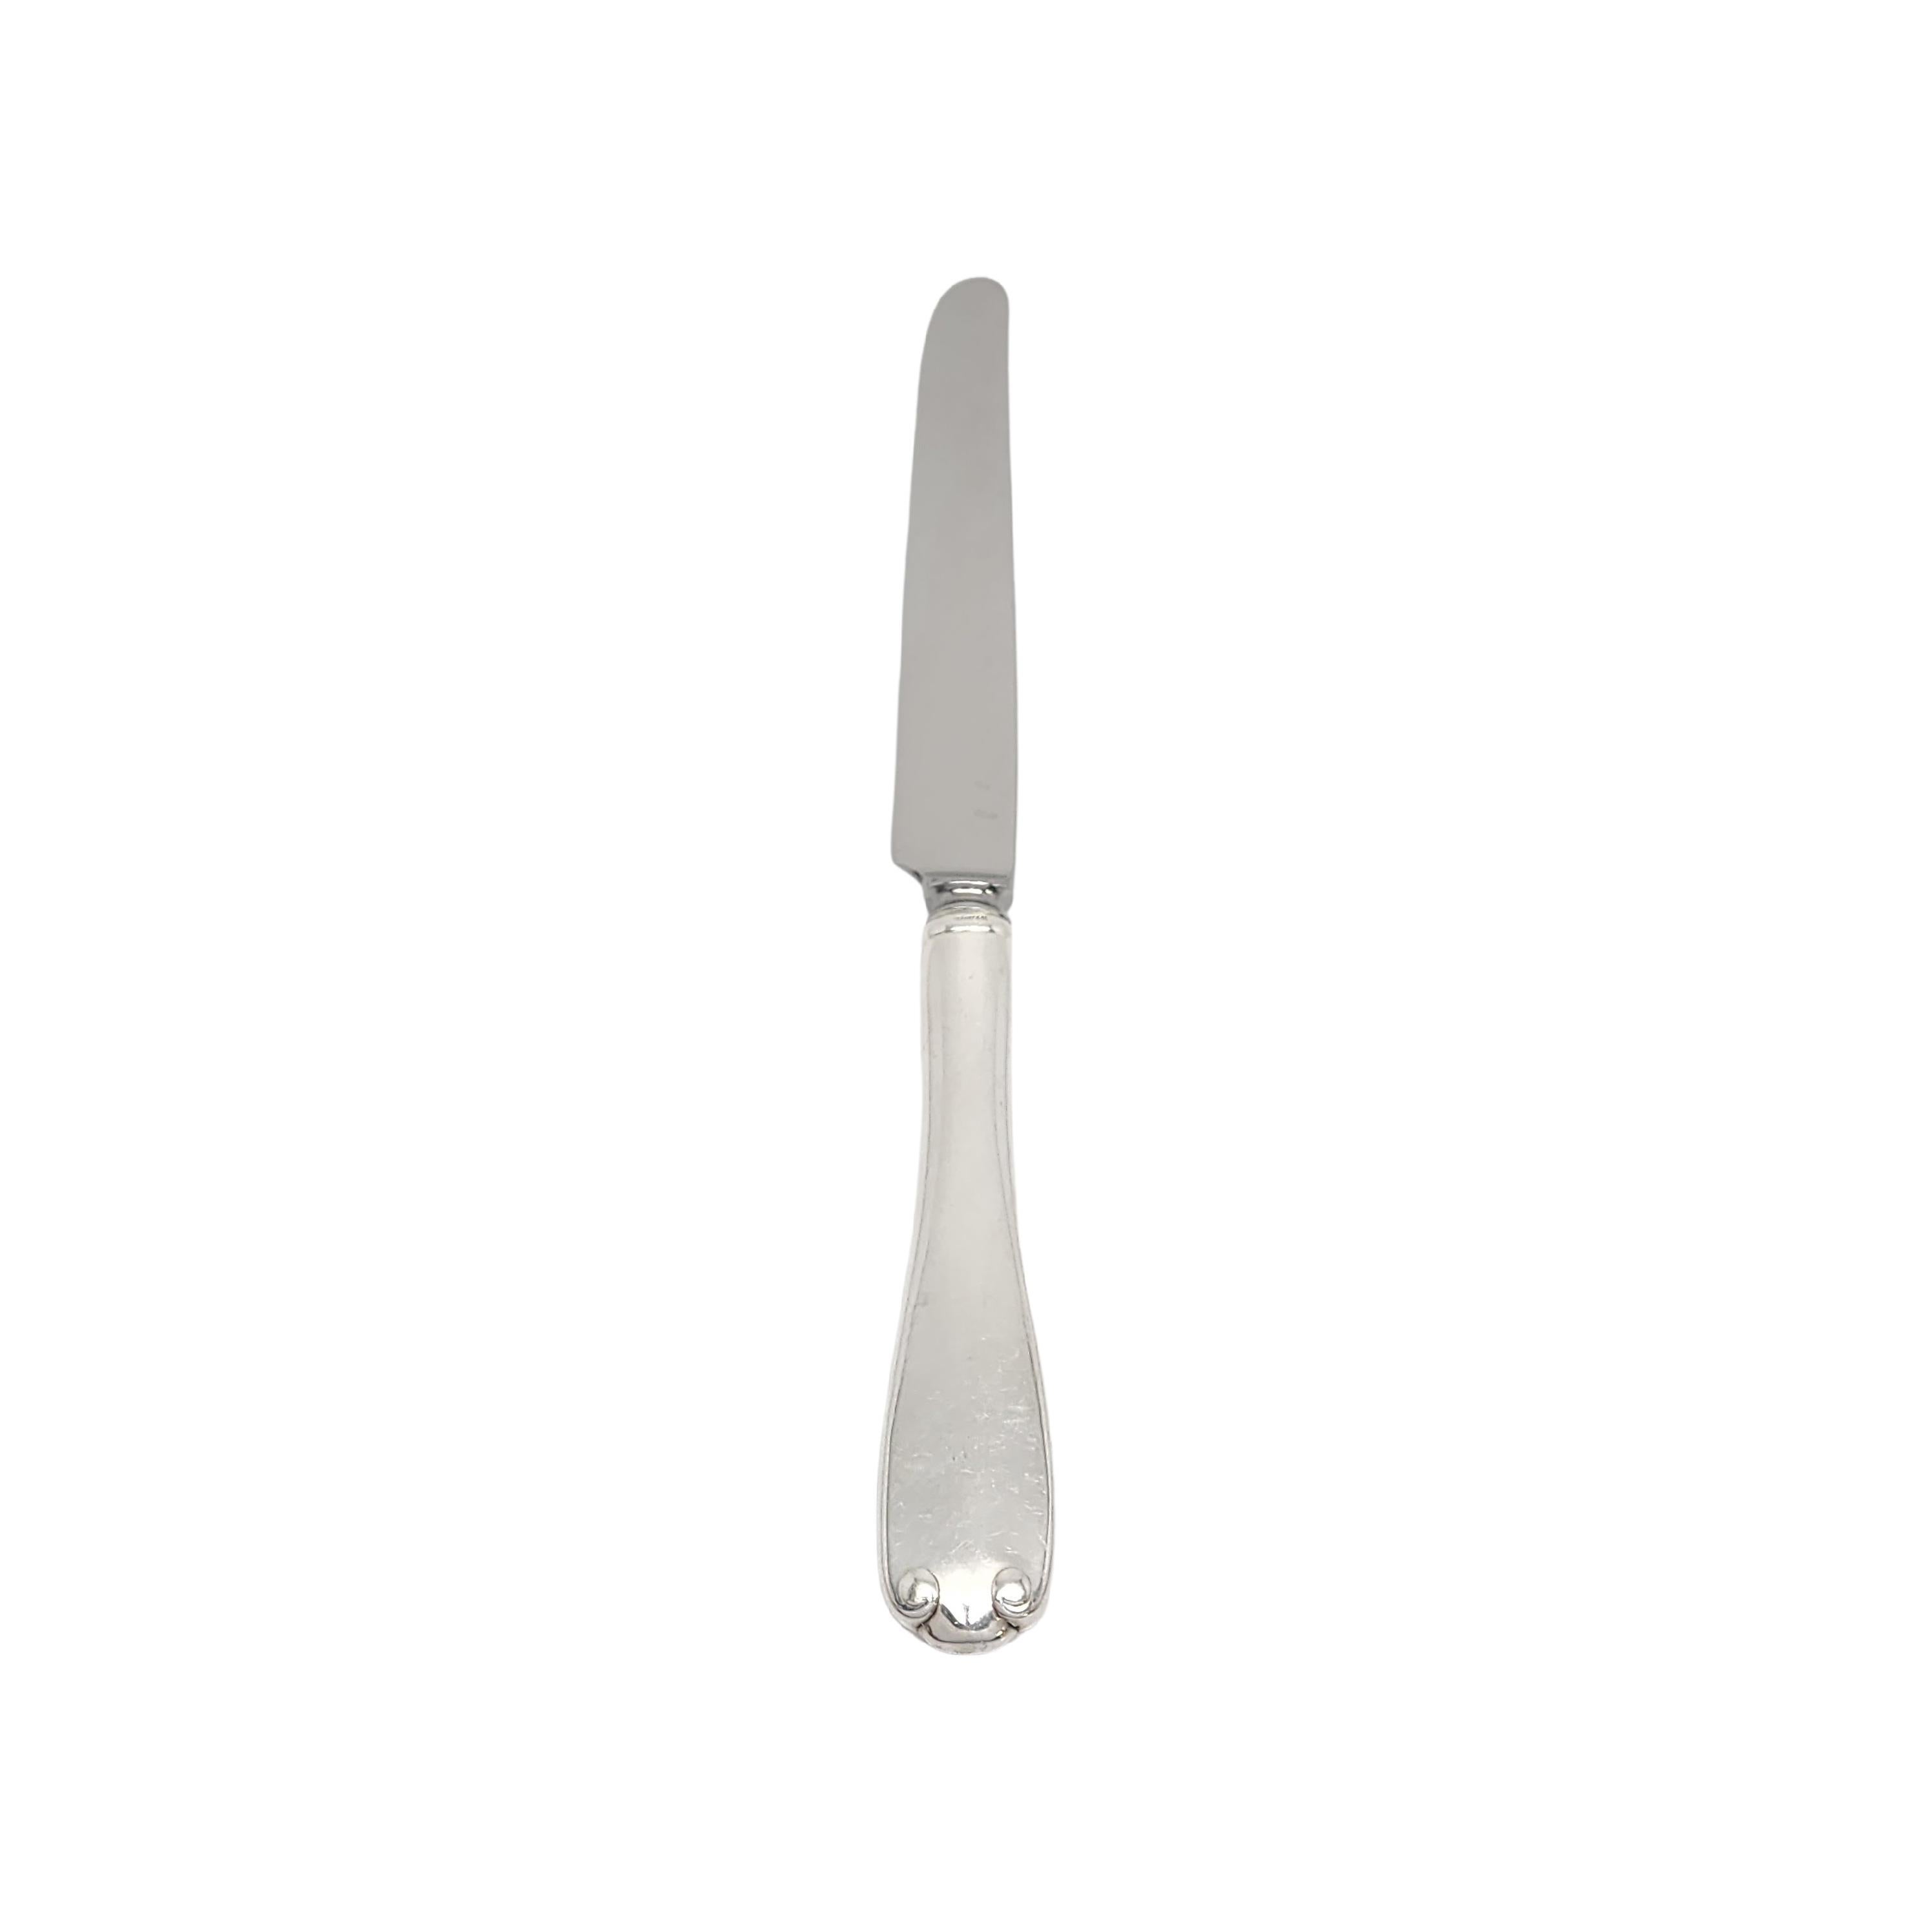 Sterling silver handle knife by Tiffany & Co in the Flemish pattern.

No monogram.

The Flemish pattern features a simple and elegant scroll design, making it a timeless classic that is still in demand today. Does not include Tiffany & Co box or